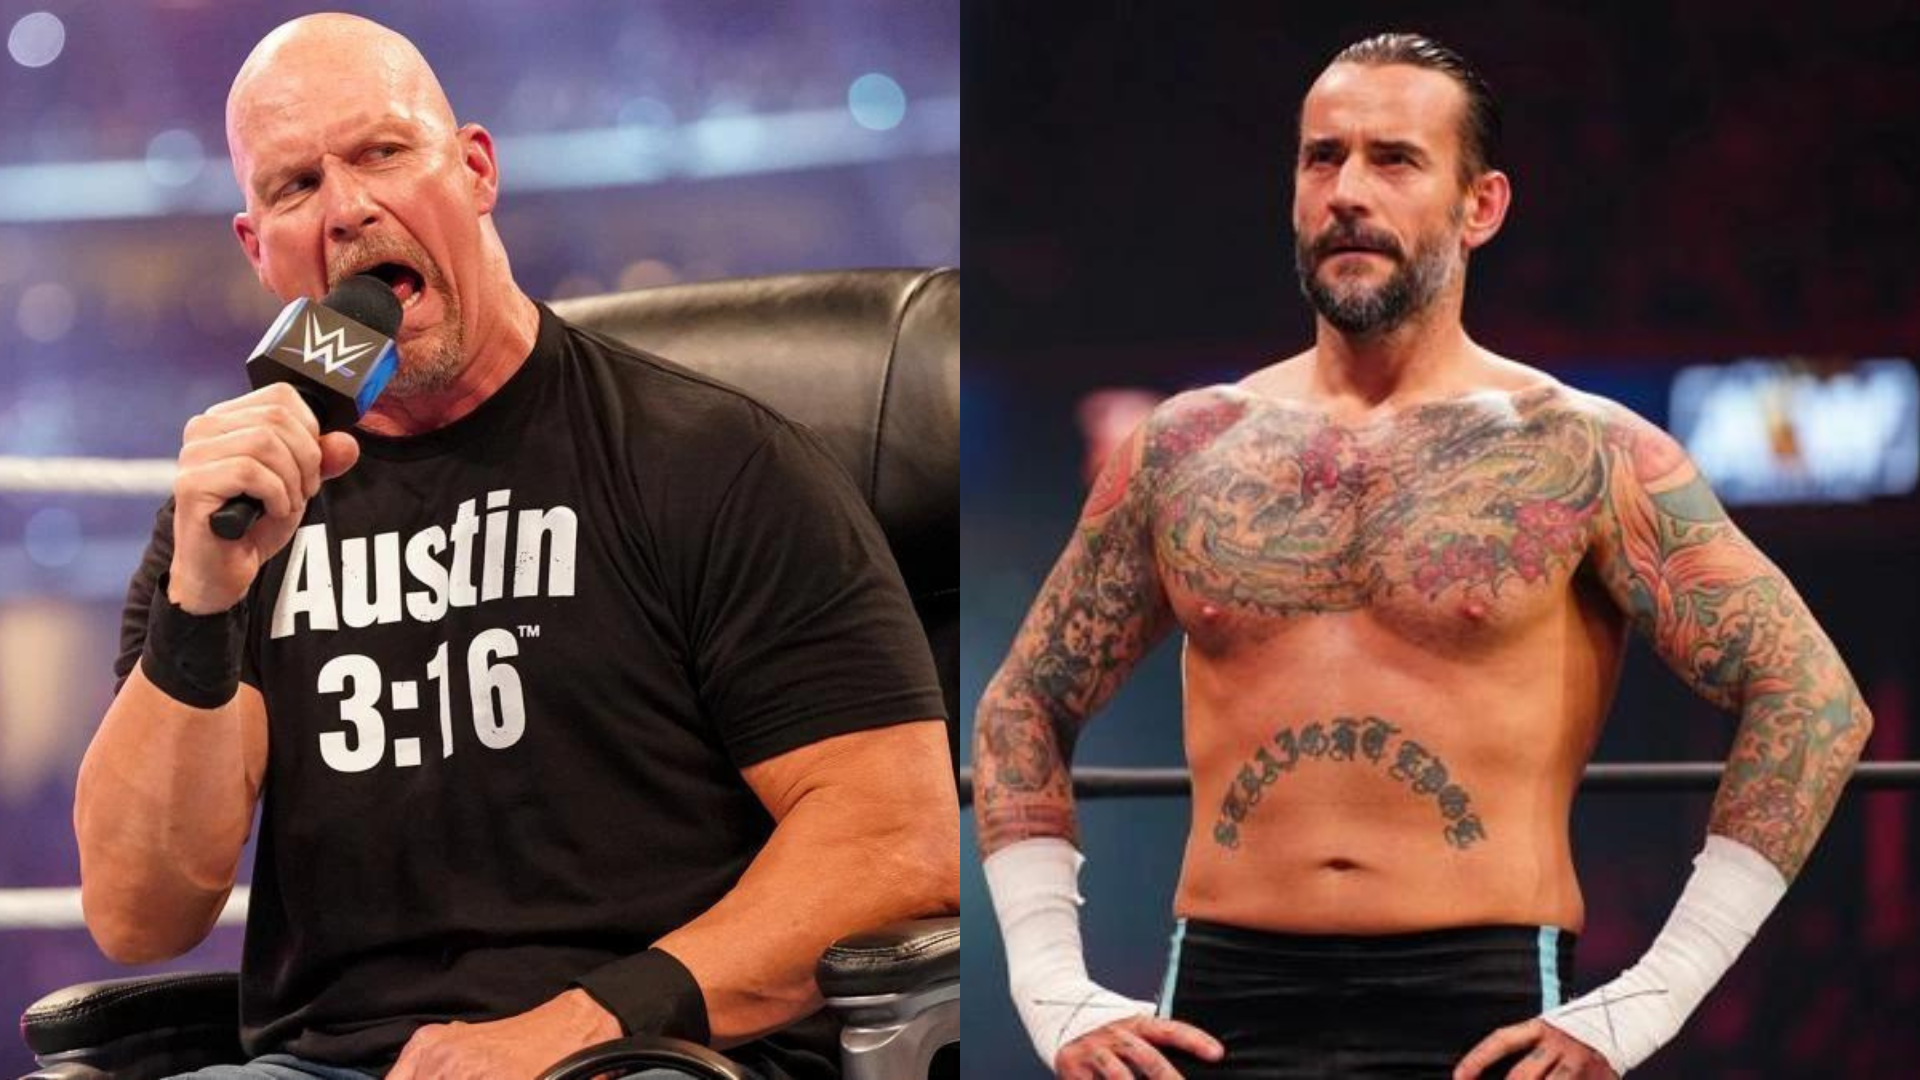 Read more about the article “You Can’t Even Mention Their Name In The Same Breath” – Ric Flair On CM Punk Vs. Stone Cold